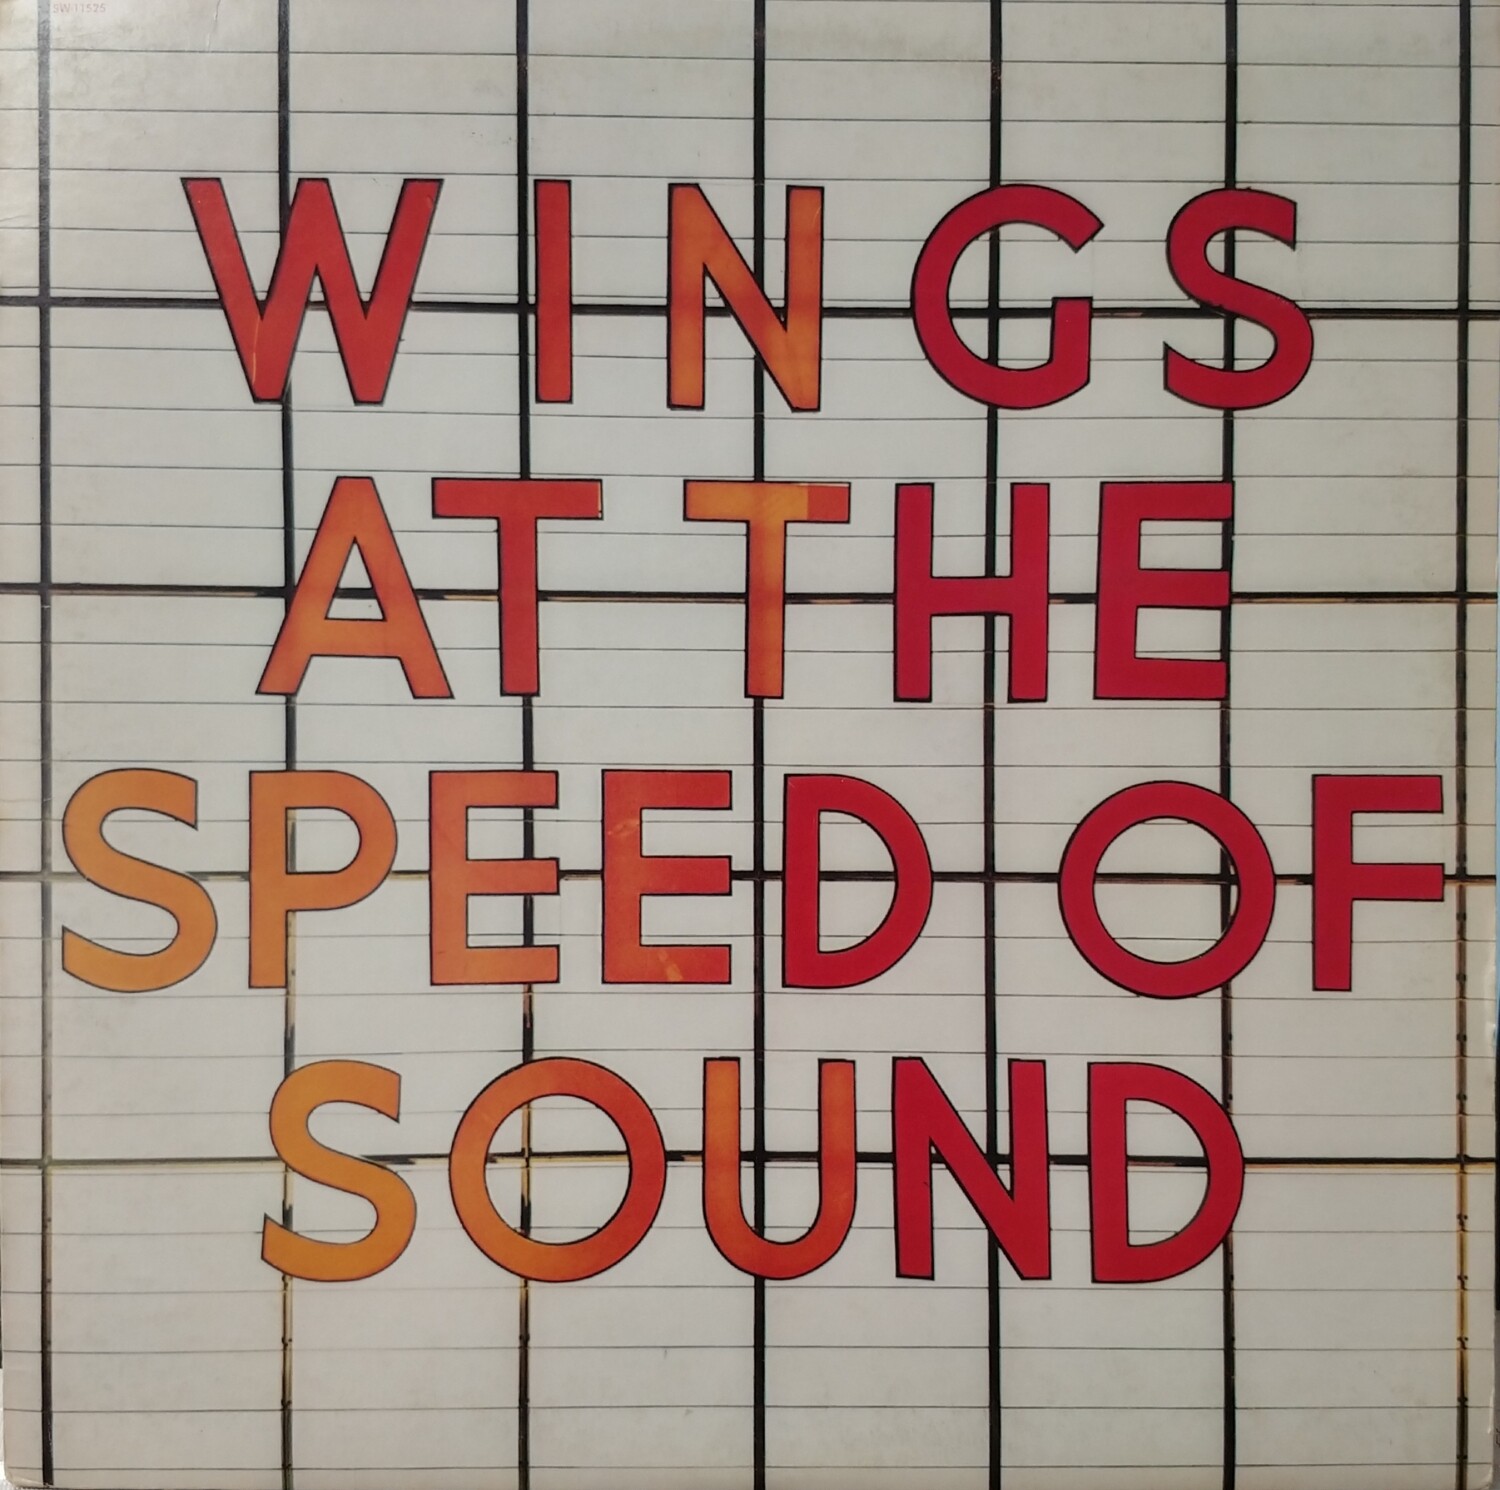 Wings - At the speed of sound